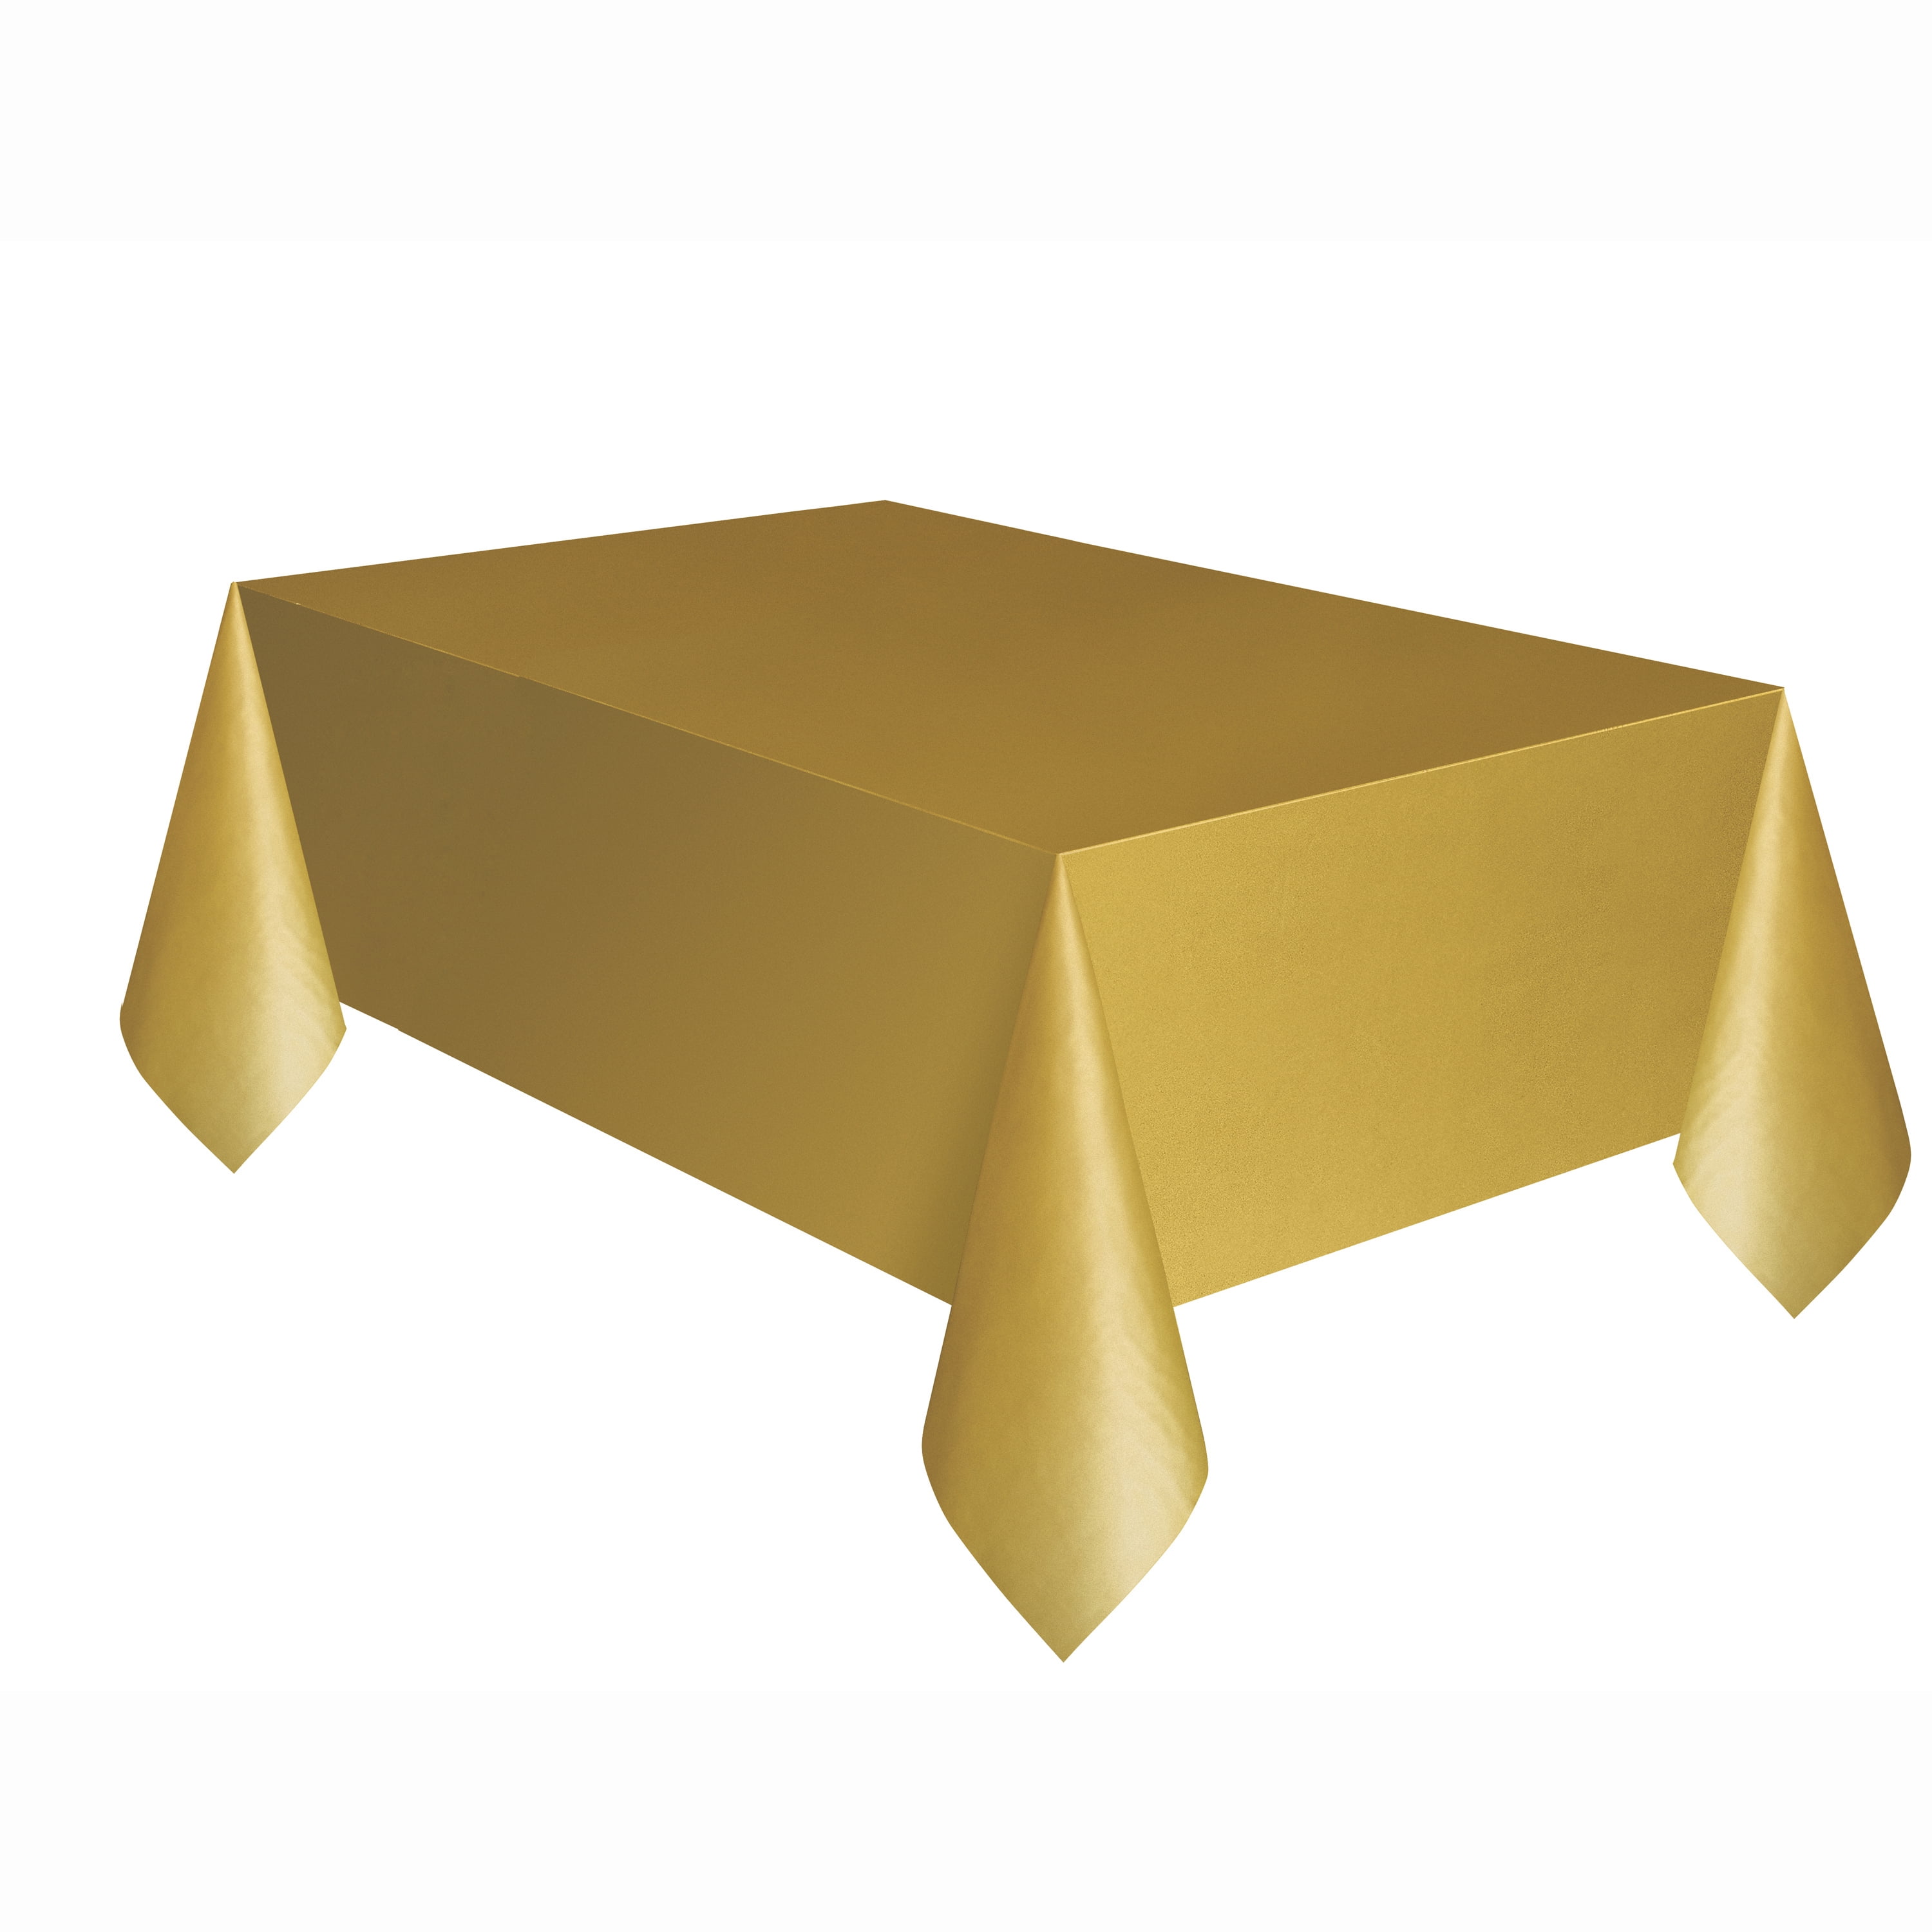 Way To Celebrate! Gold Plastic Party Tablecloth, 108in x 54in